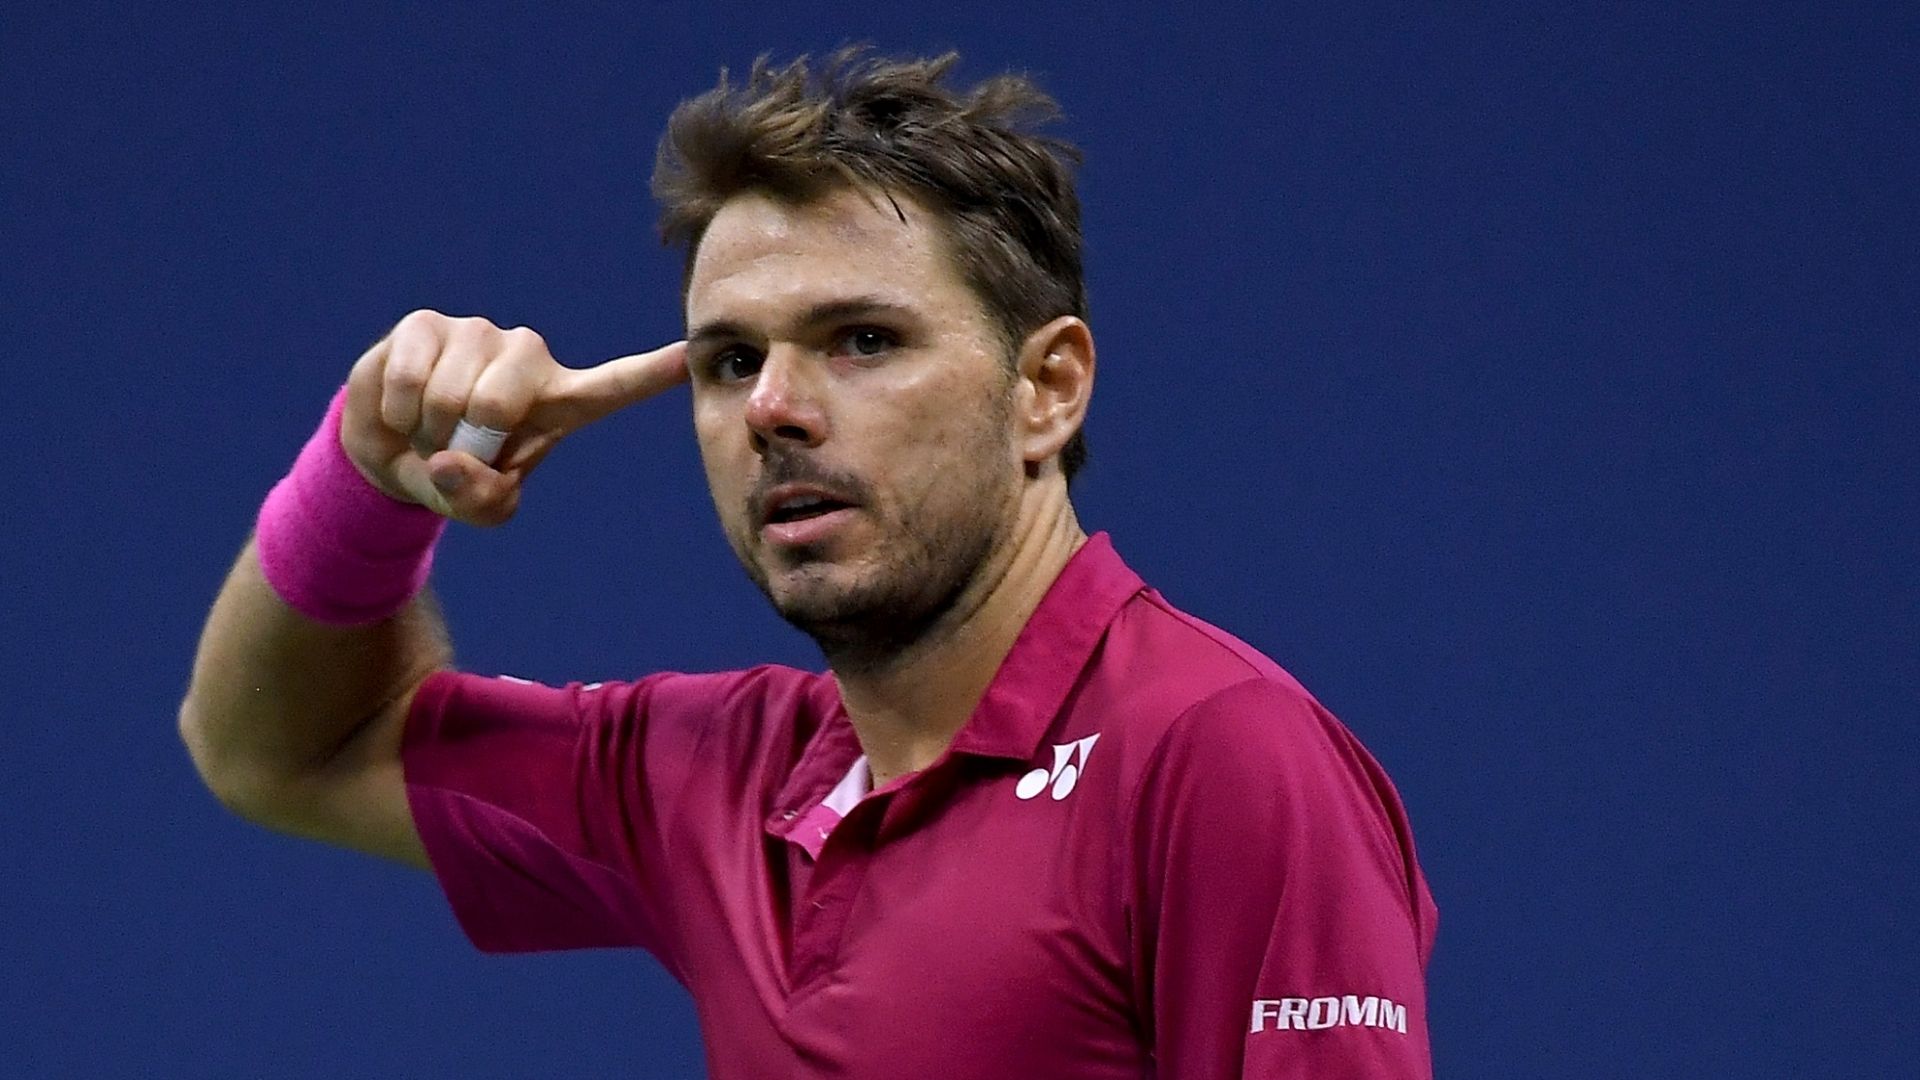 Wawrinka goes up two sets to one in final